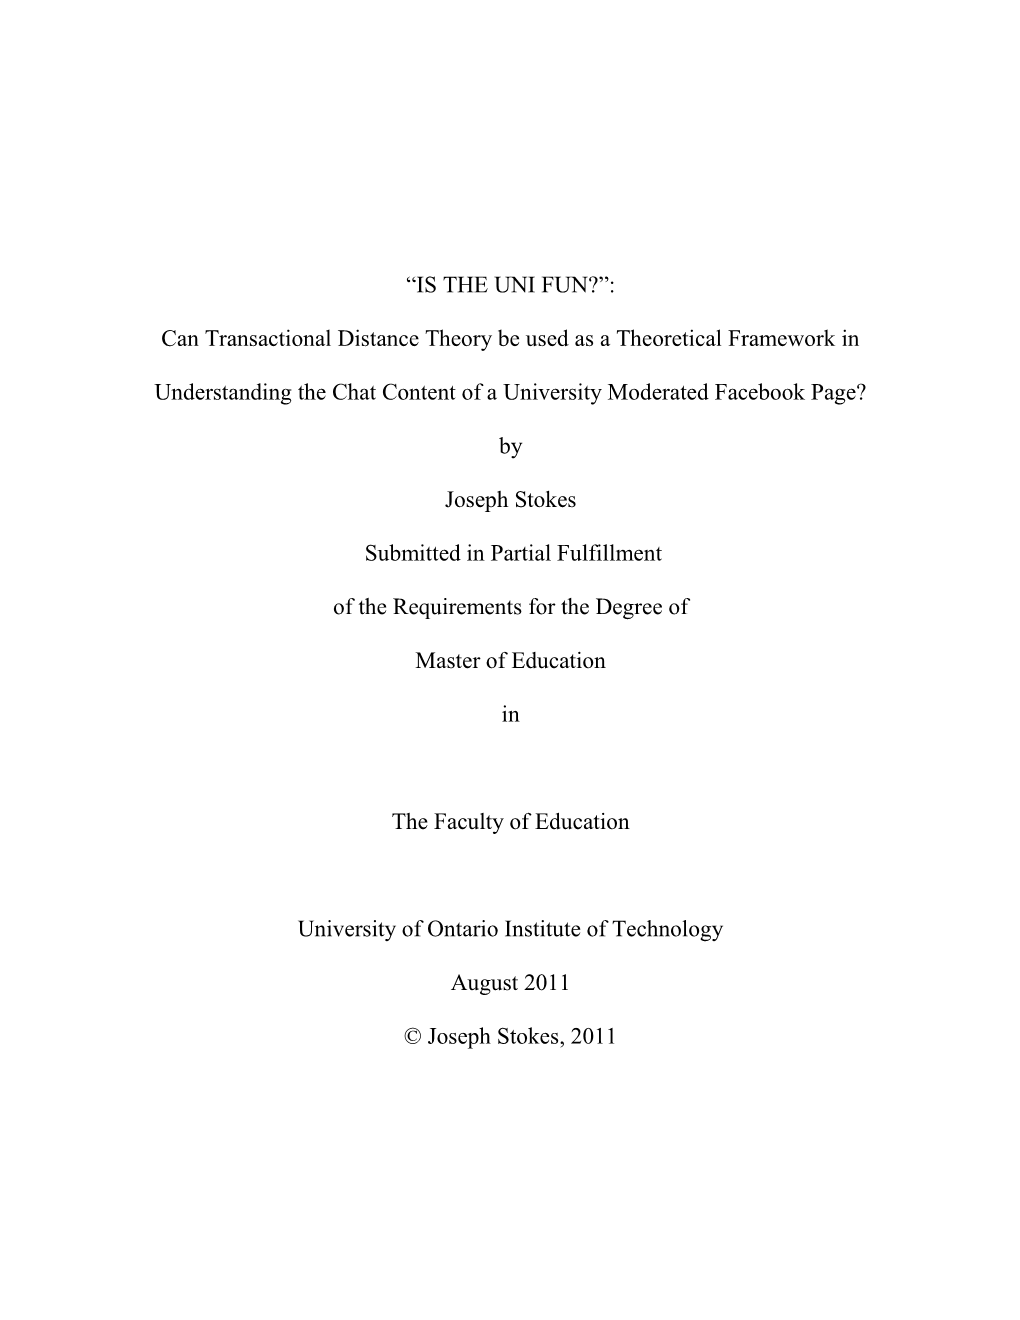 “IS the UNI FUN?”: Can Transactional Distance Theory Be